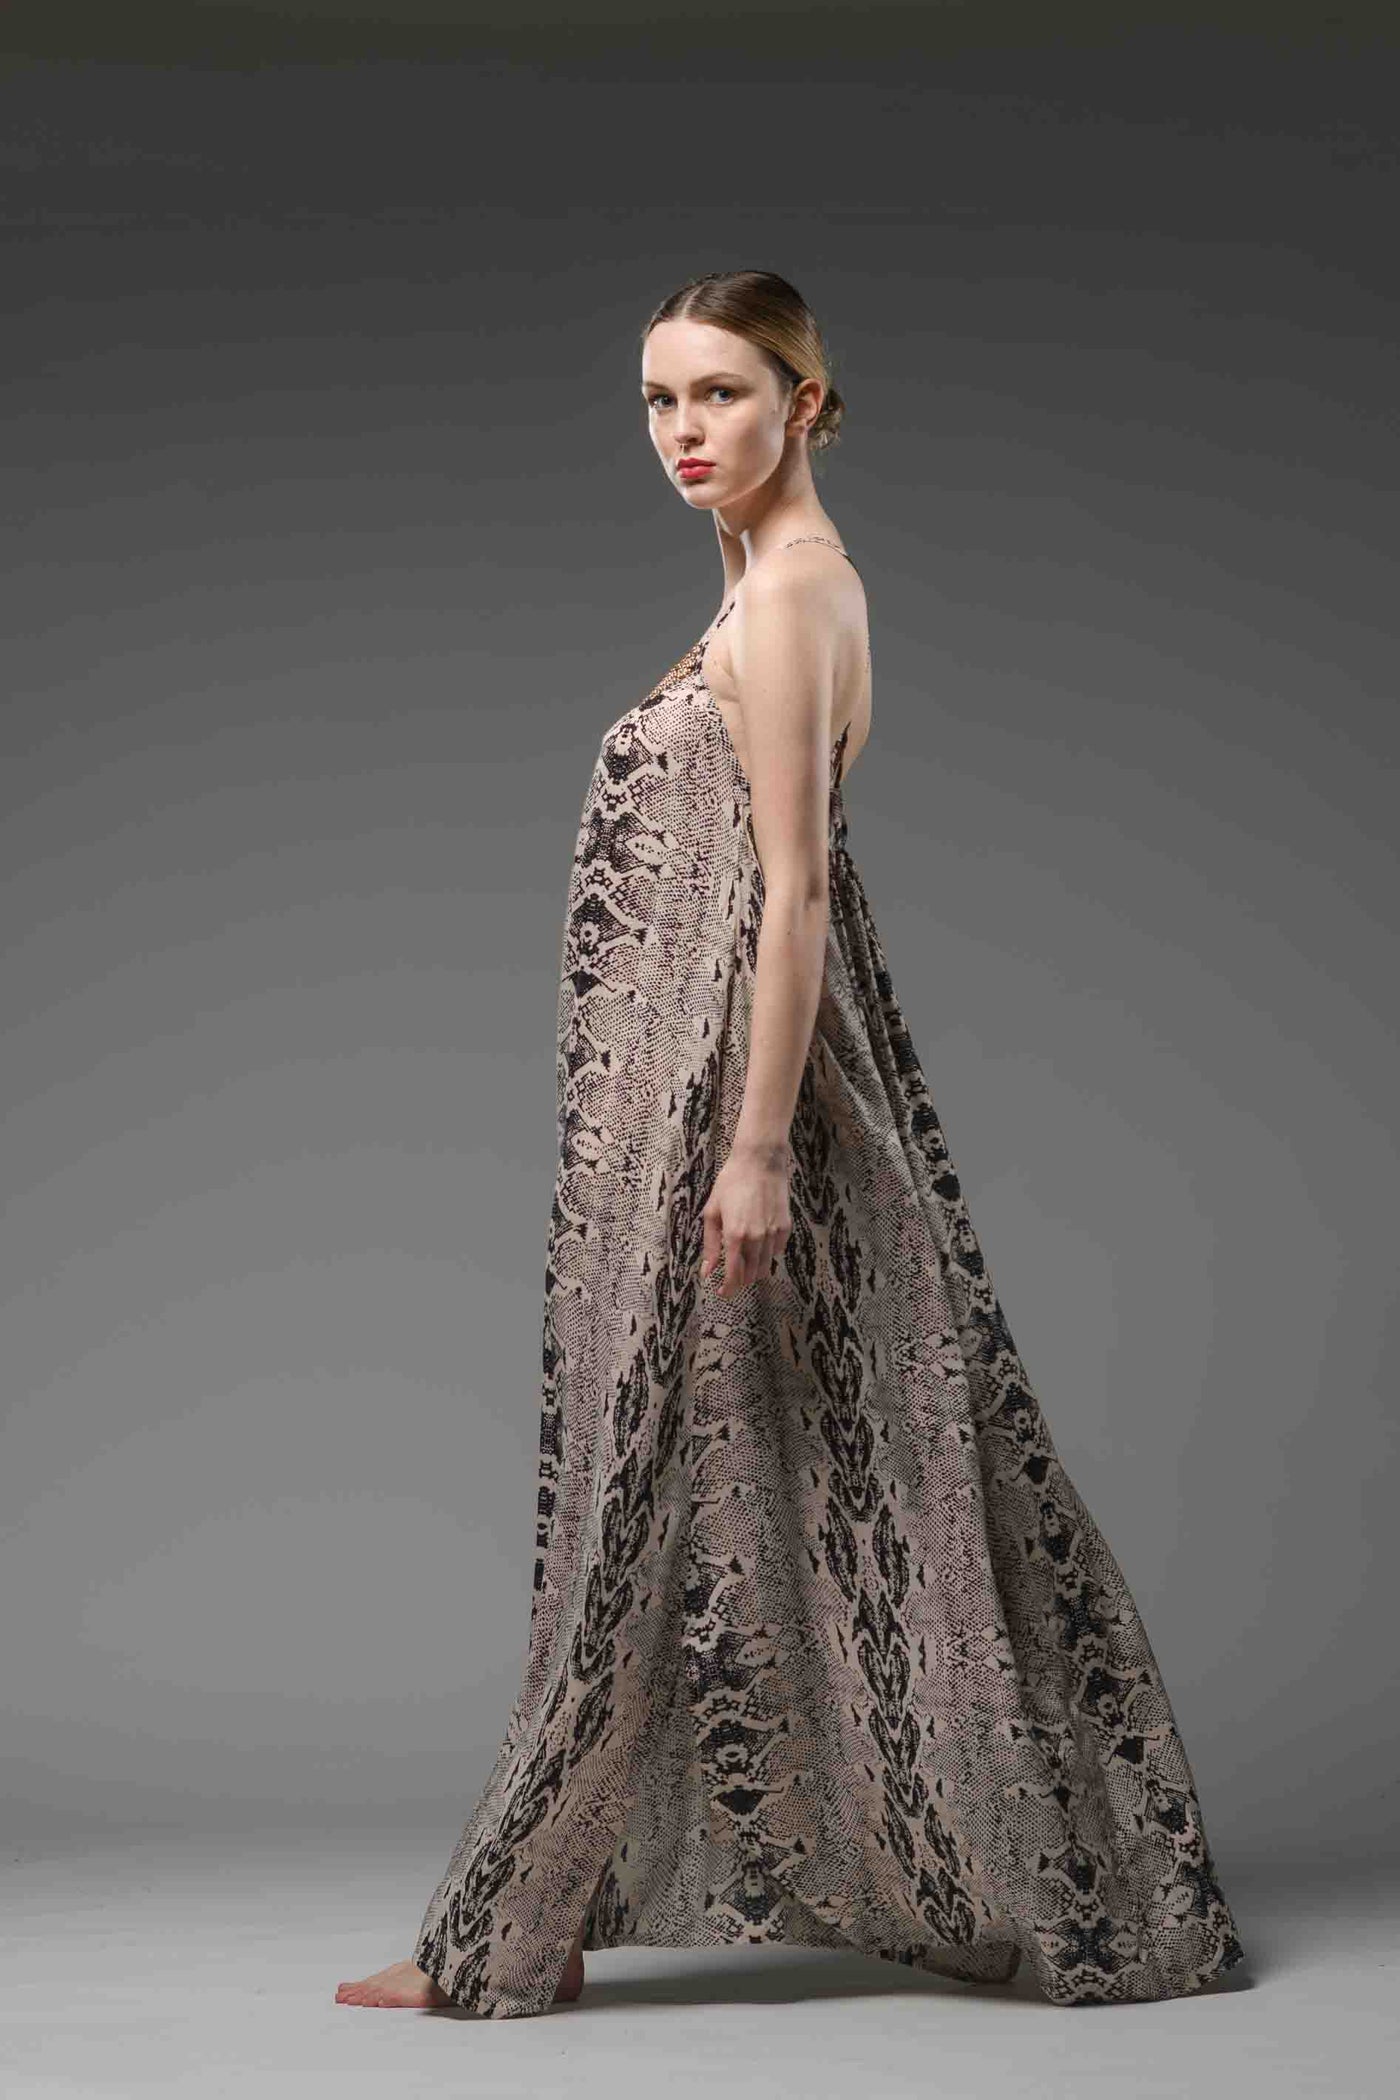 Backless python print spaghetti cross in back spaghetti straps A-line long dress with embroidered brass beaded neck line